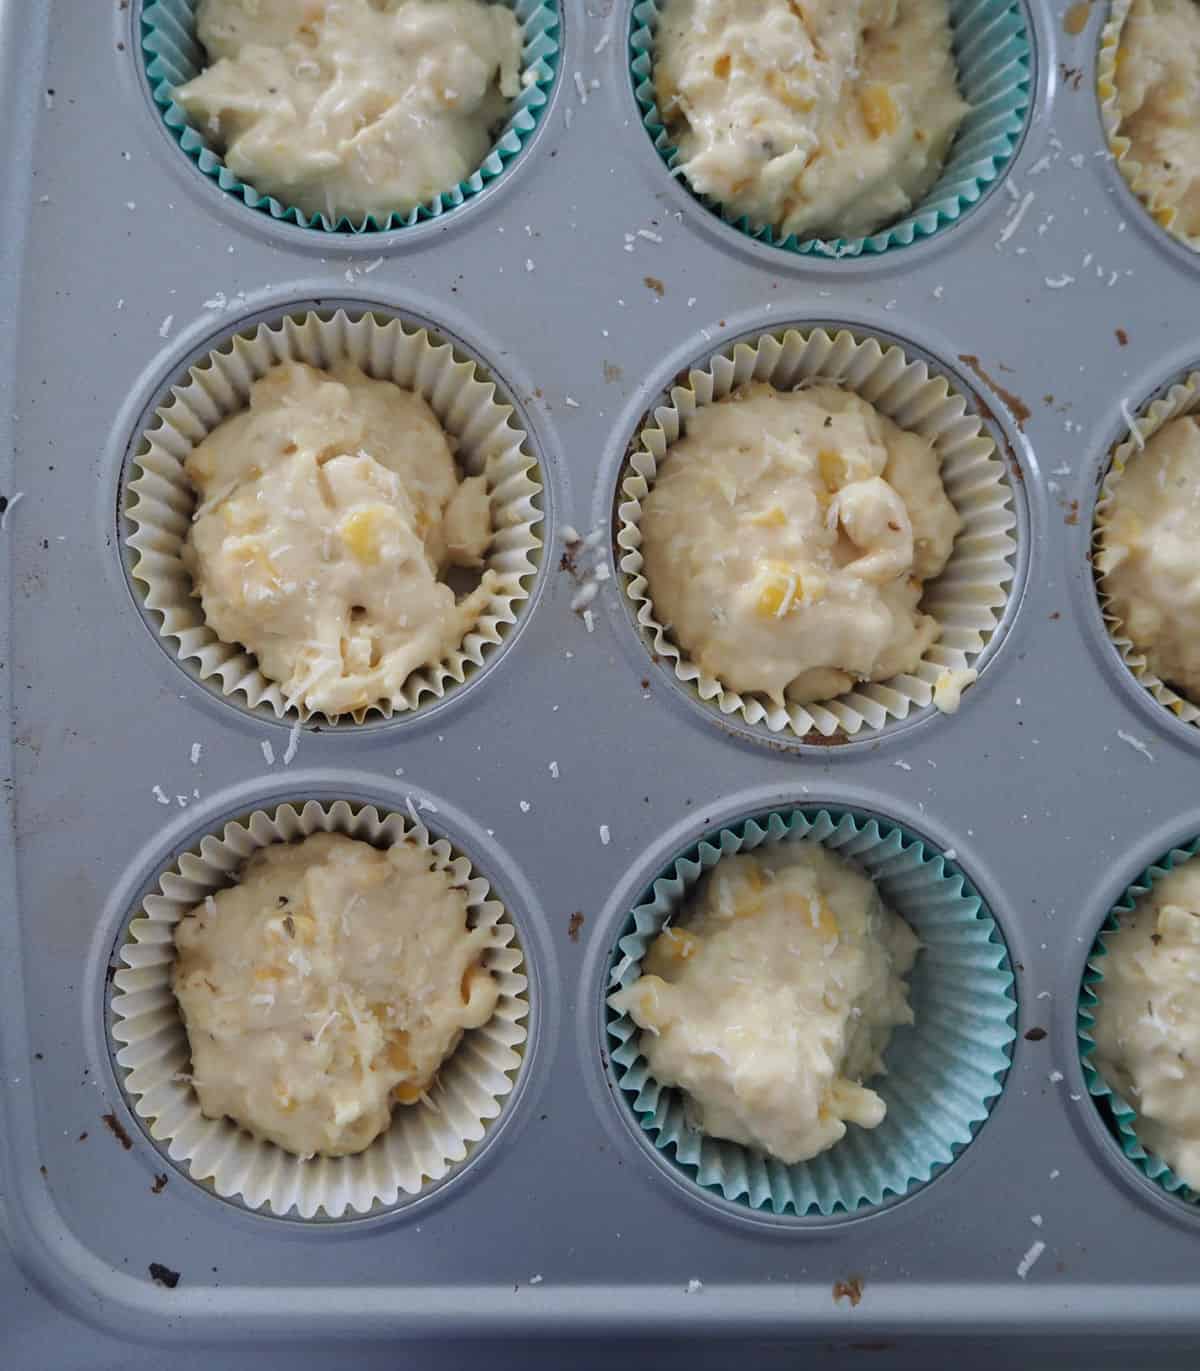 Cheese and Corn Muffin mixture in a baking tray